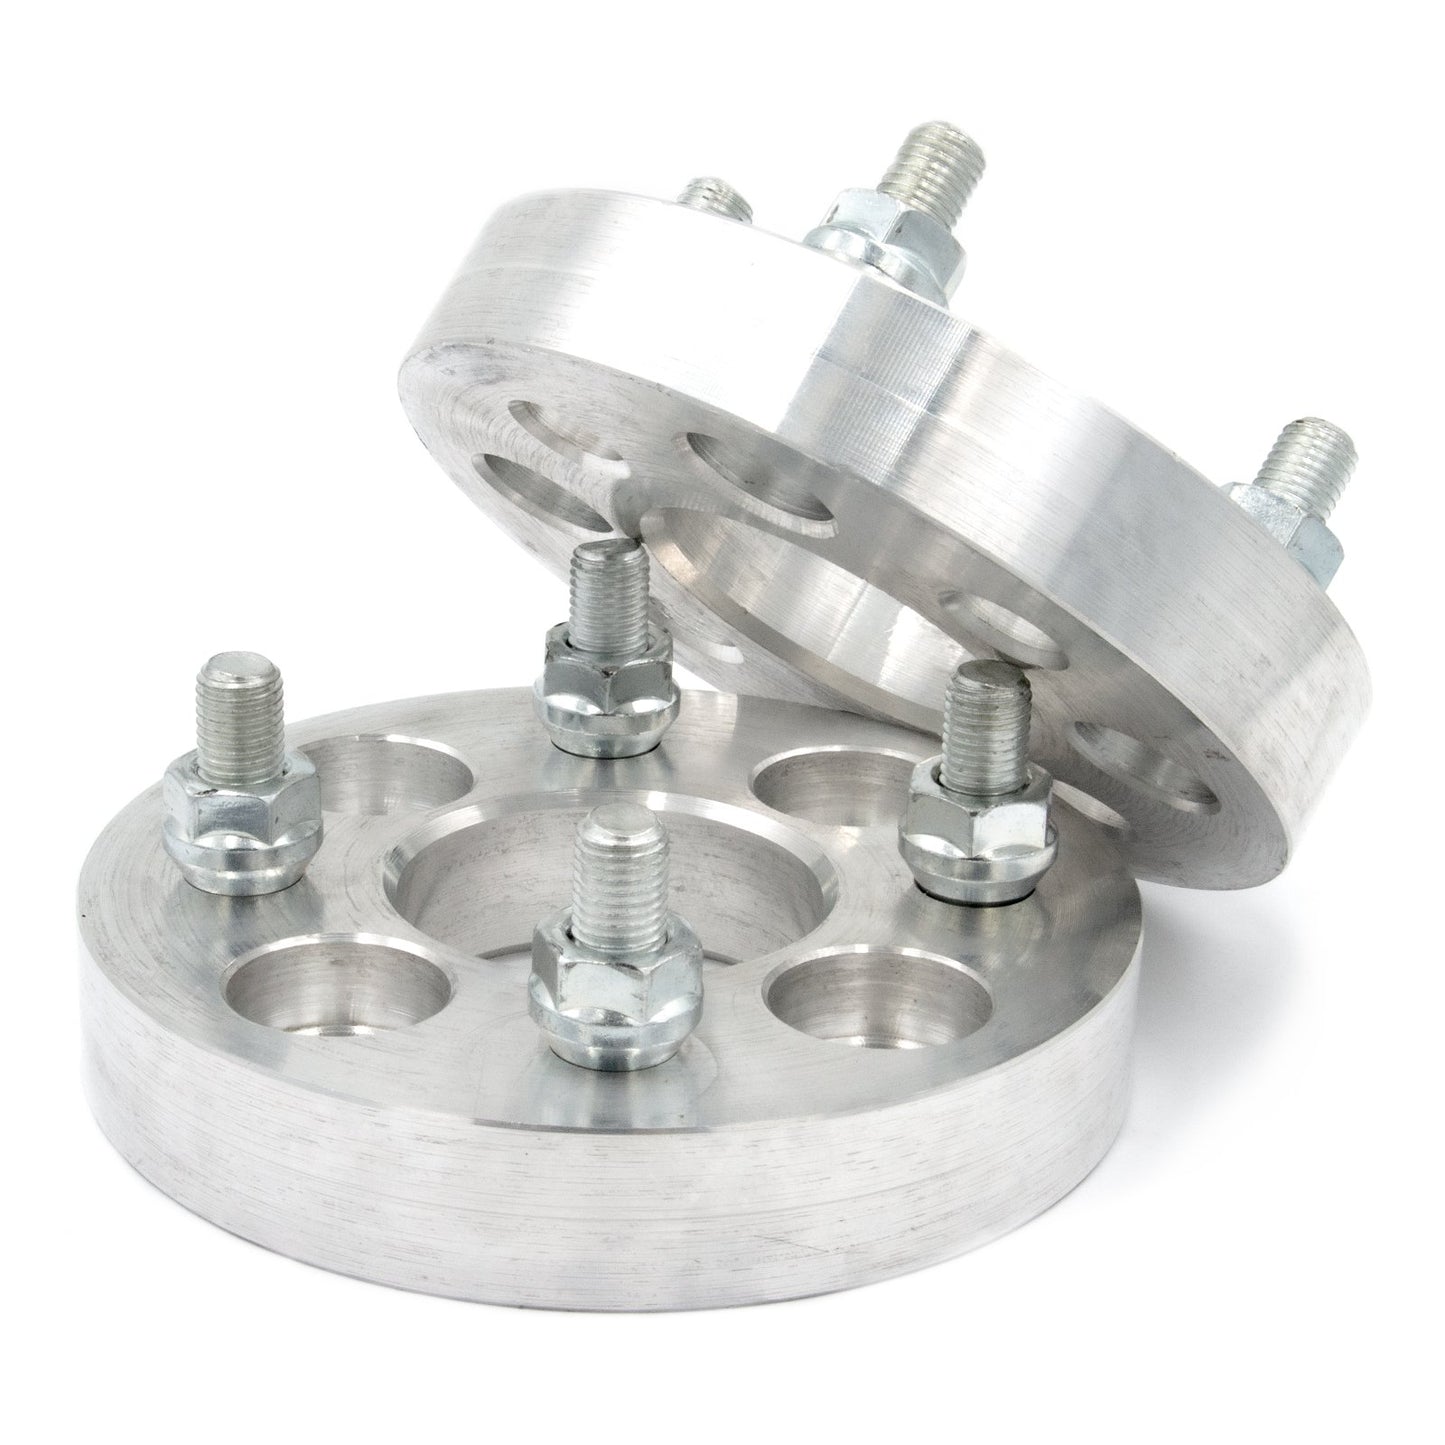 4x110 to 4x100 Wheel Spacer/Adapter - Thickness: 3/4"- 4"